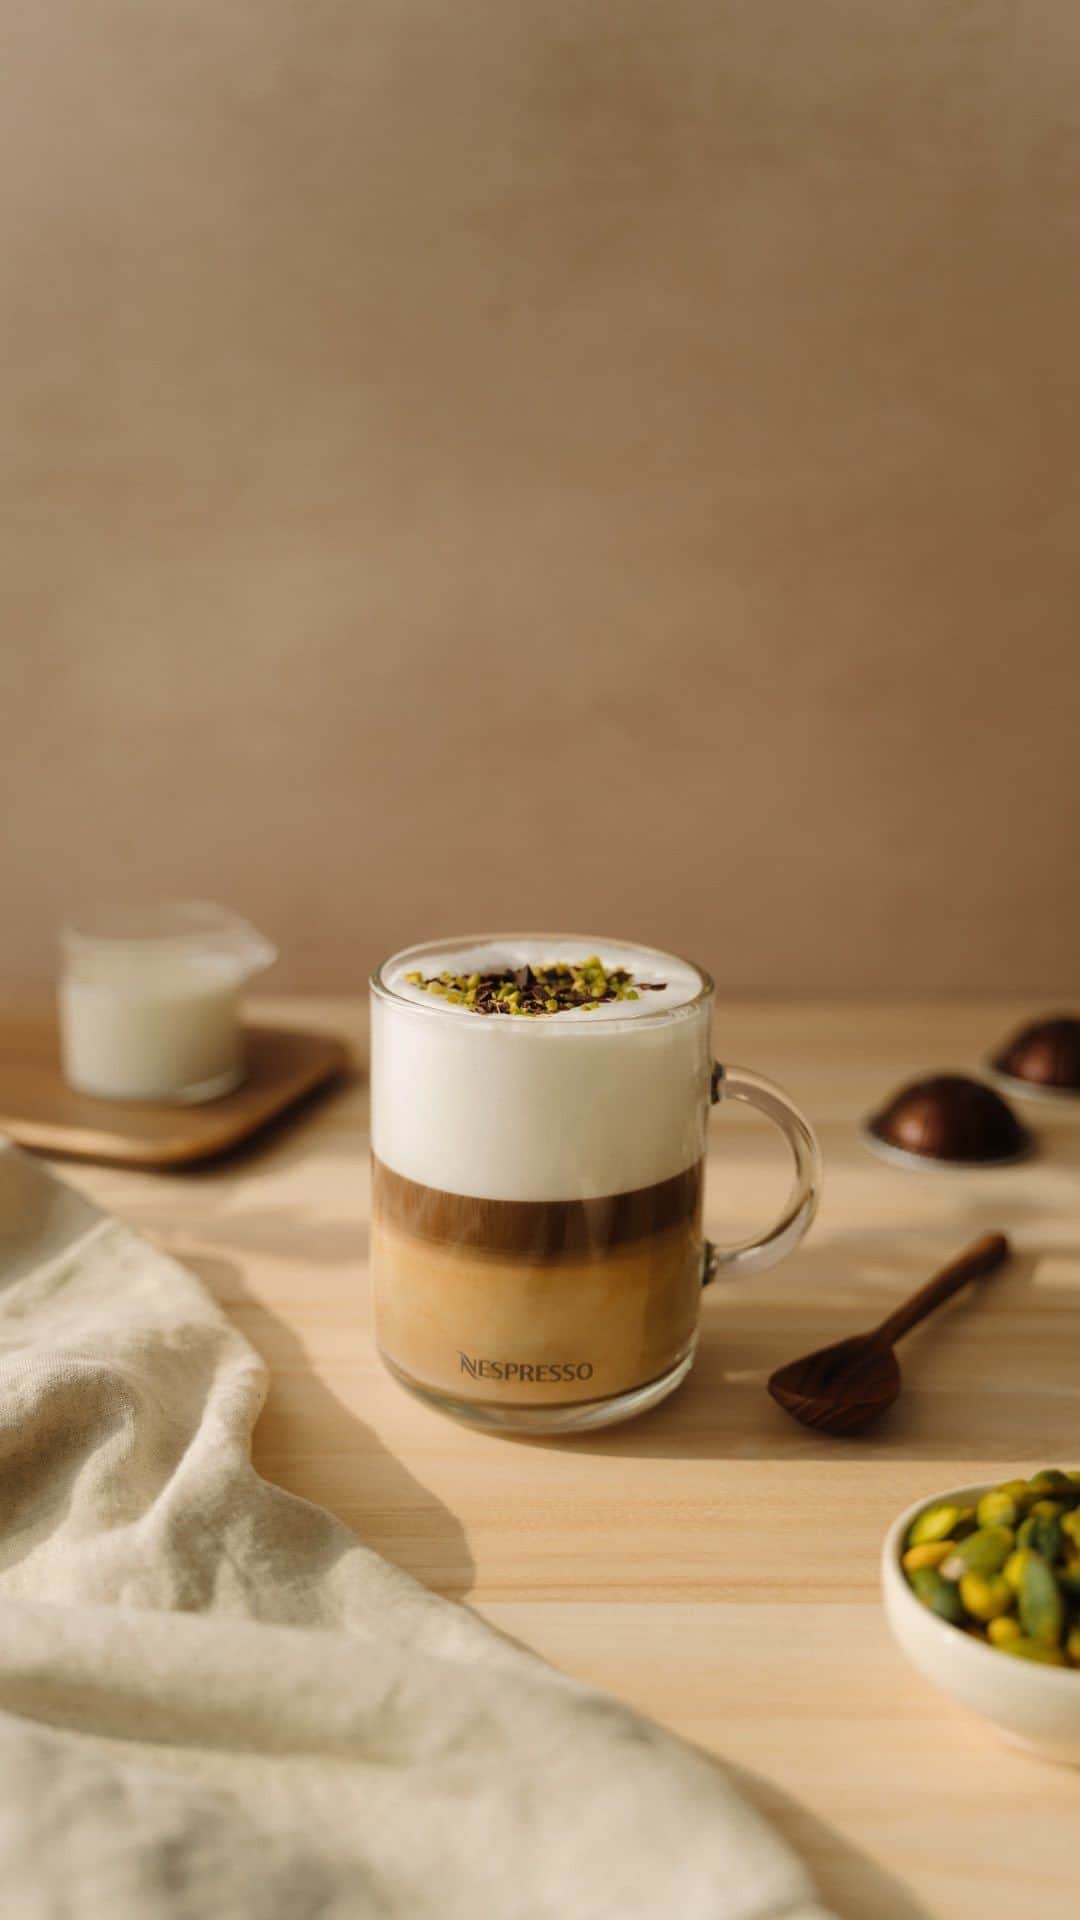 Nespressoのインスタグラム：「Because what’s life without a little something sweet?   Celebrate this Easter with our latest Nespresso recipe: a creamy base of rich chocolate, topped with Nespresso Barista Milk Creations coffee, velvety frothed milk, and crunchy pistachios. ☕️✨  ☕️ Here’s how to make it:  1-Pour 10 ml of salted pistachio syrup and 5 ml of dark chocolate sauce into a Vertuo long cup. 2-Extract 40 ml of Bianco Piccolo directly into the cup and pour over 110 ml of hot milk foam. 3-Top with crunchy pistachios and shaved dark chocolate to finish. 😋  #Nespresso #NespressoVertuo #NespressoCreativeCups #Easter」